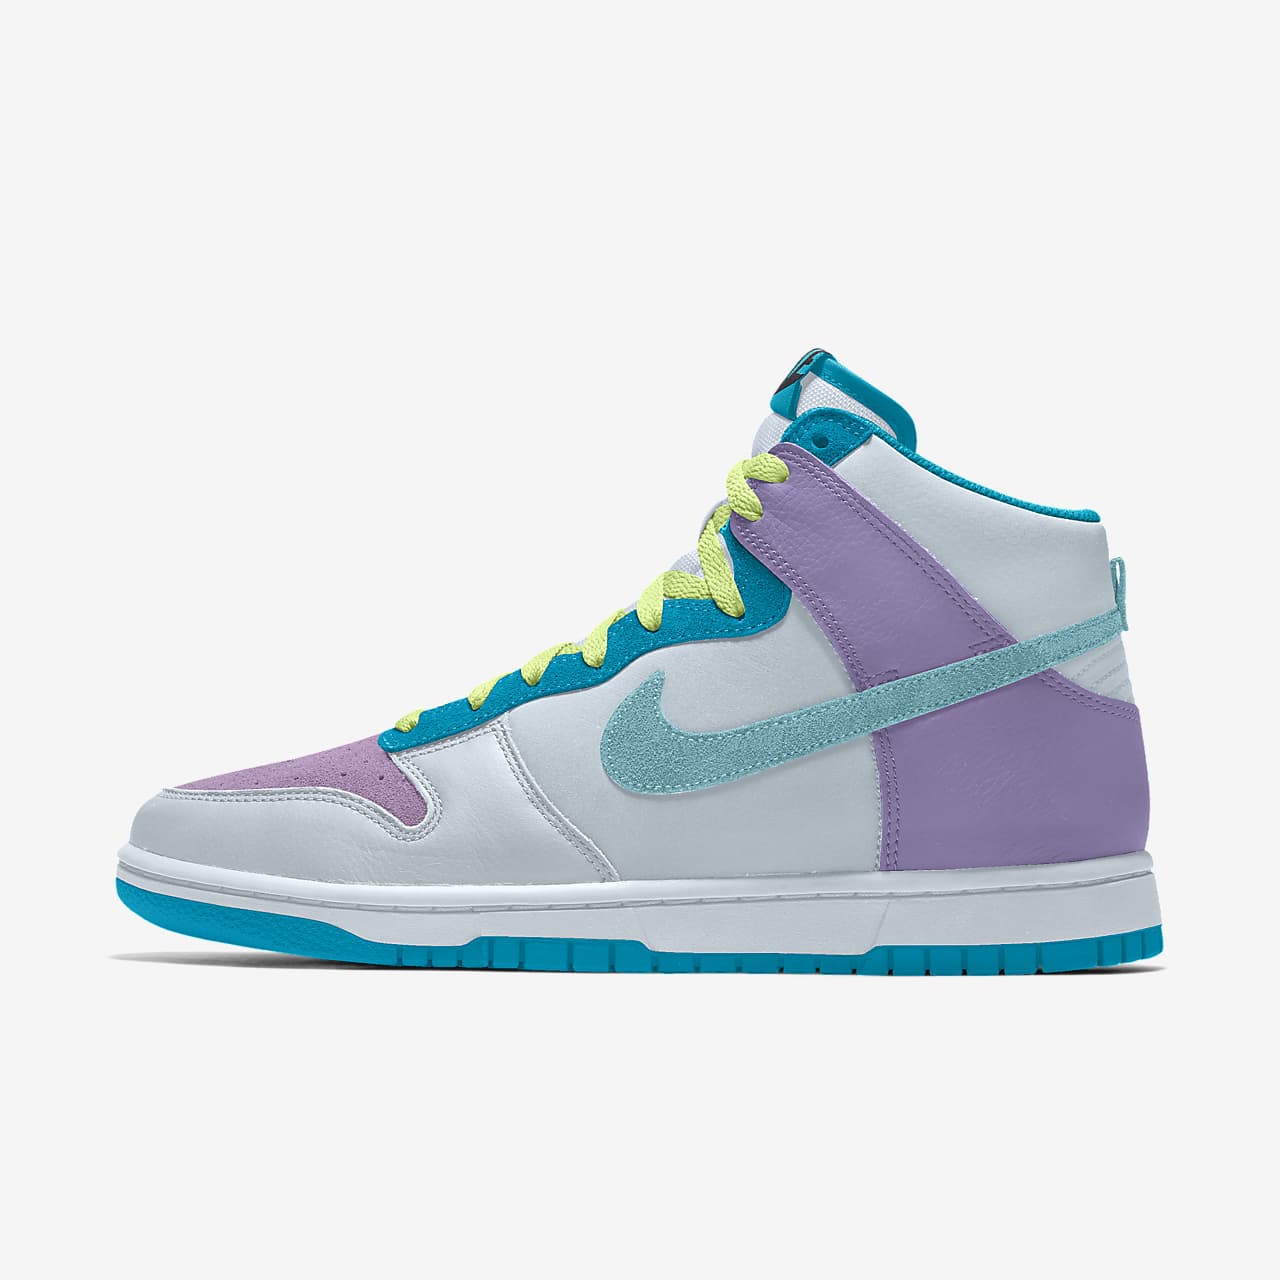 Chaussure personnalisable Nike Dunk High By You pour Femme